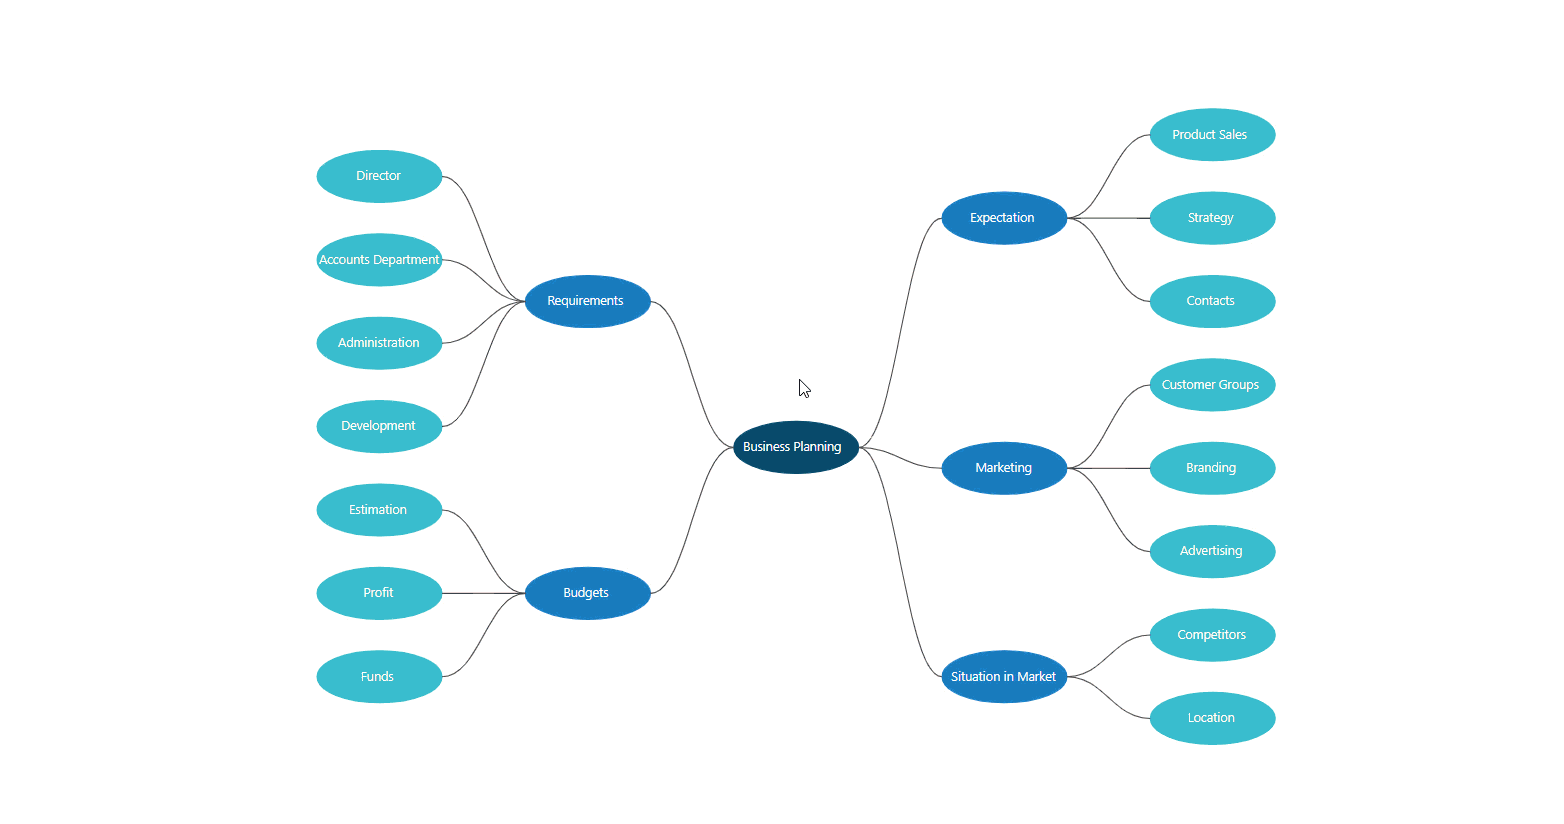 Dragging and Dropping Nodes in the Blazor Mind Map